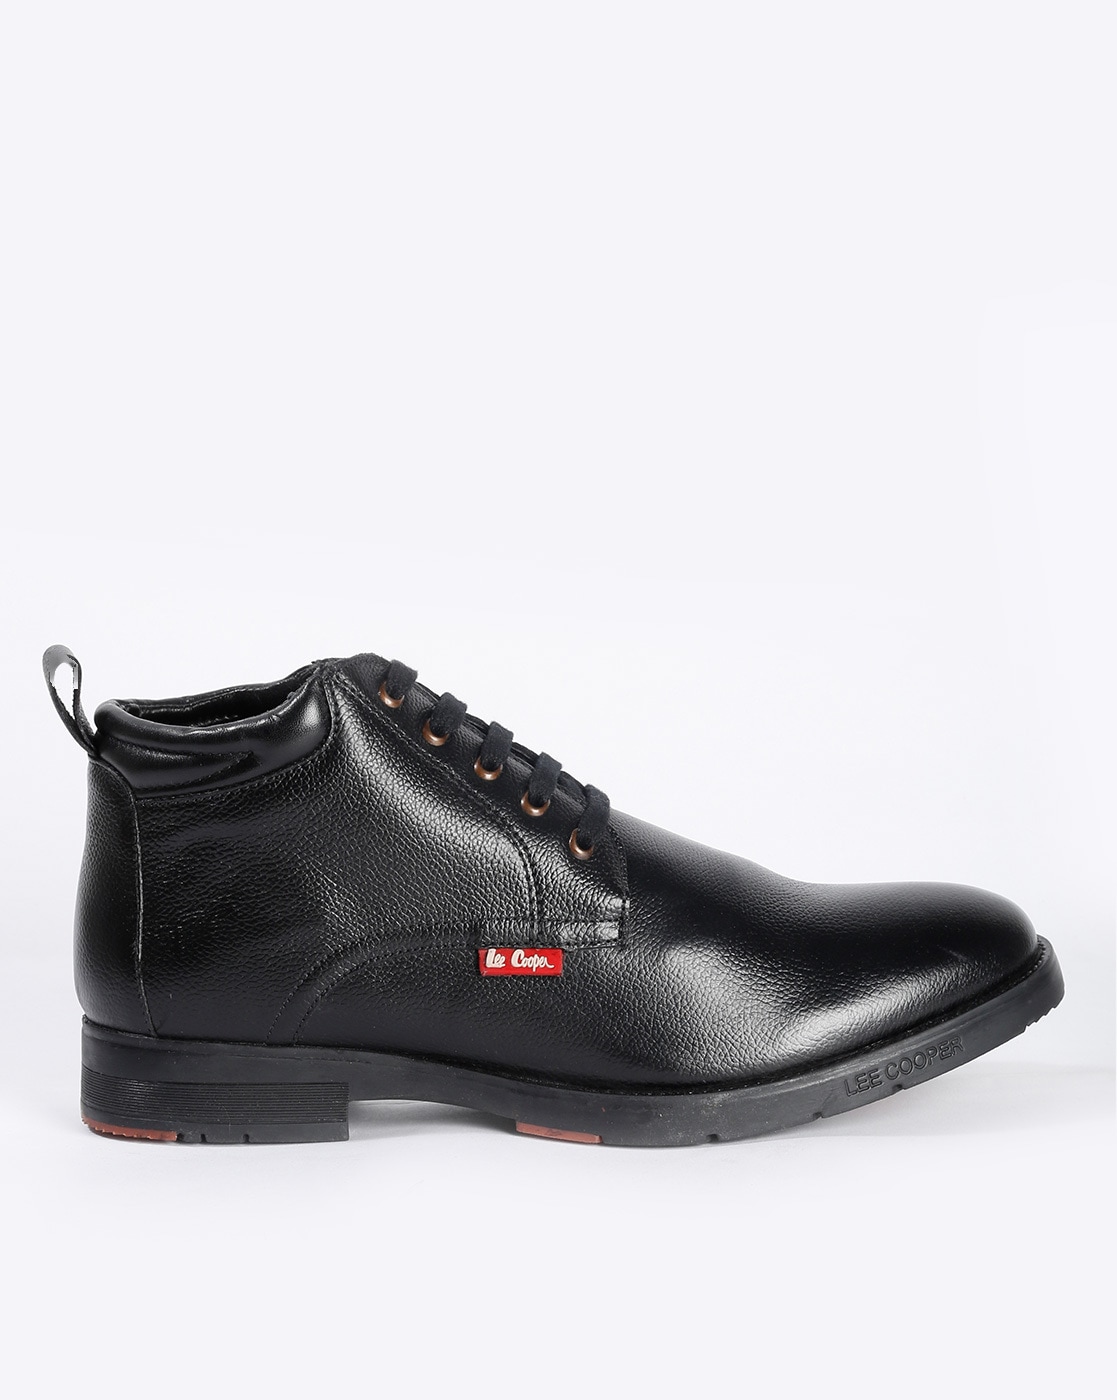 high ankle shoes lee cooper